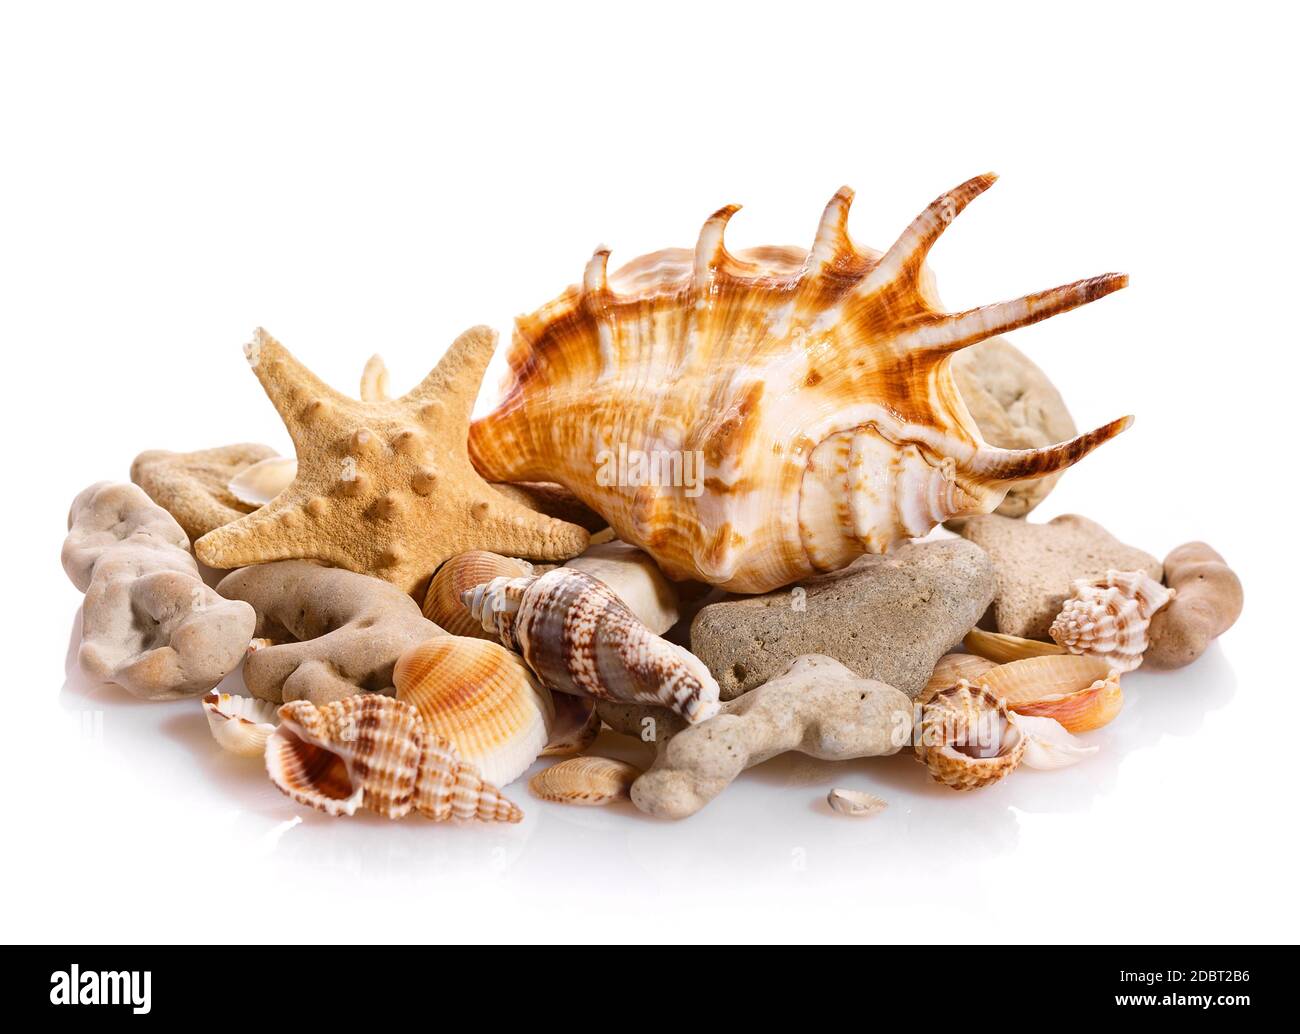 Some shells from the ocean isolated on white background. Natural materials. Stock Photo